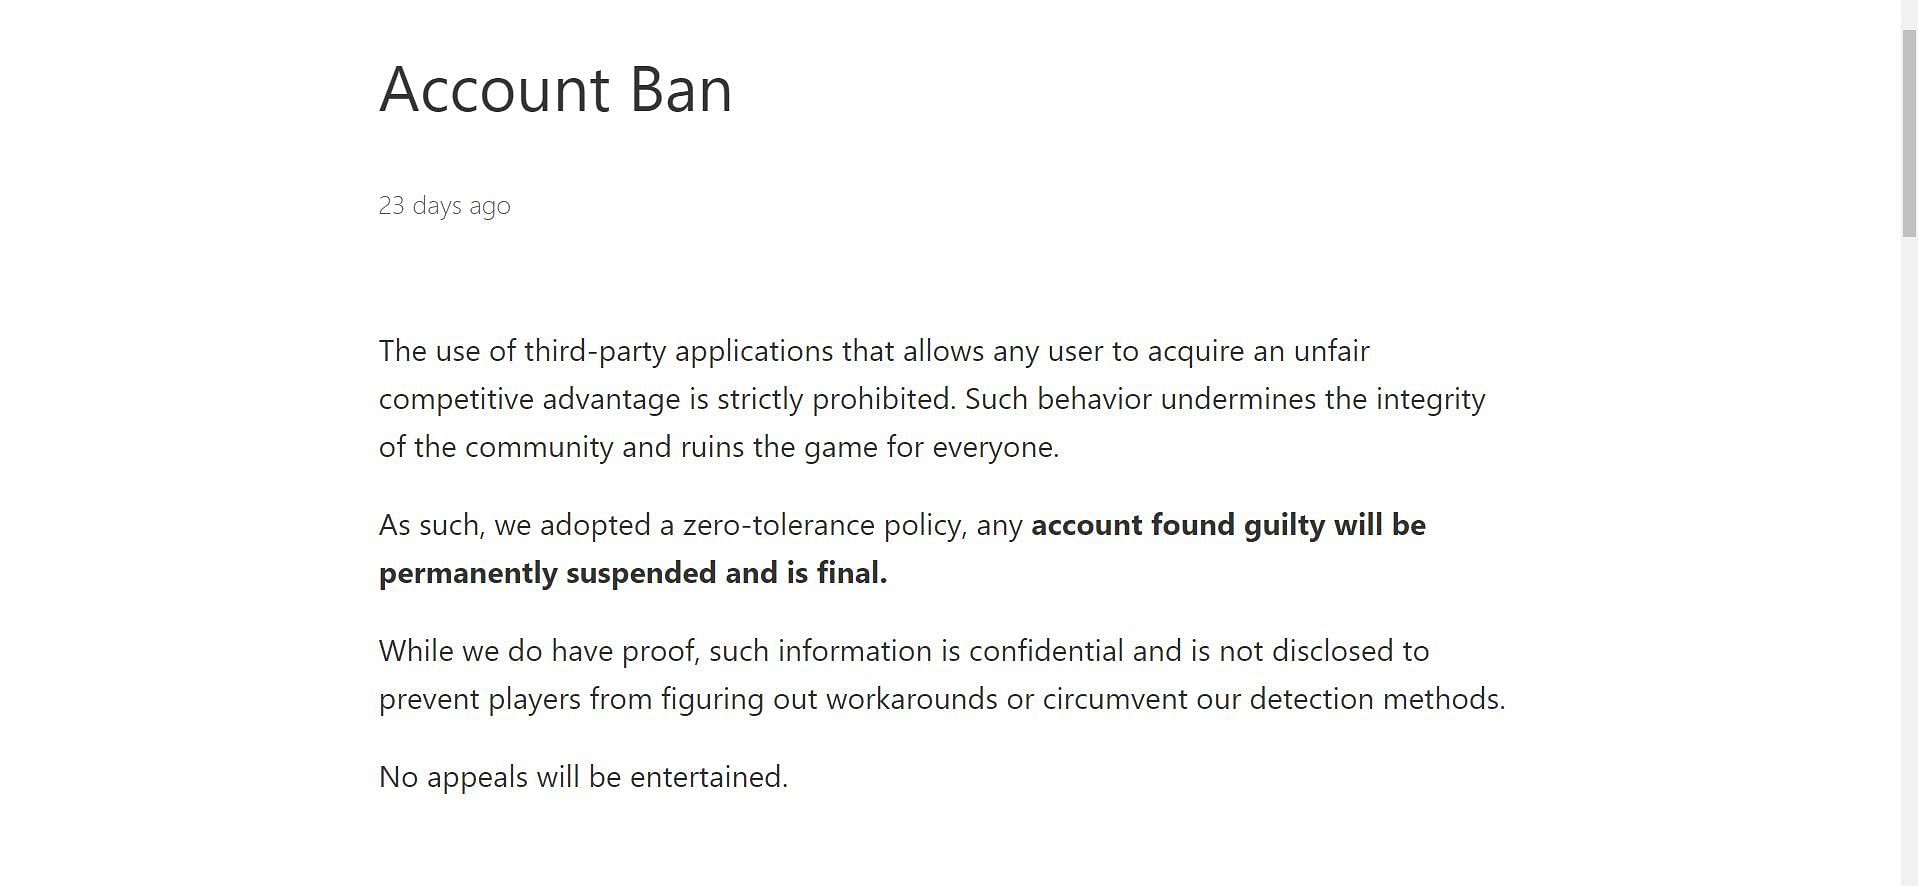 Once accounts are banned, appeal will not be entertained (Image via Free Fire)